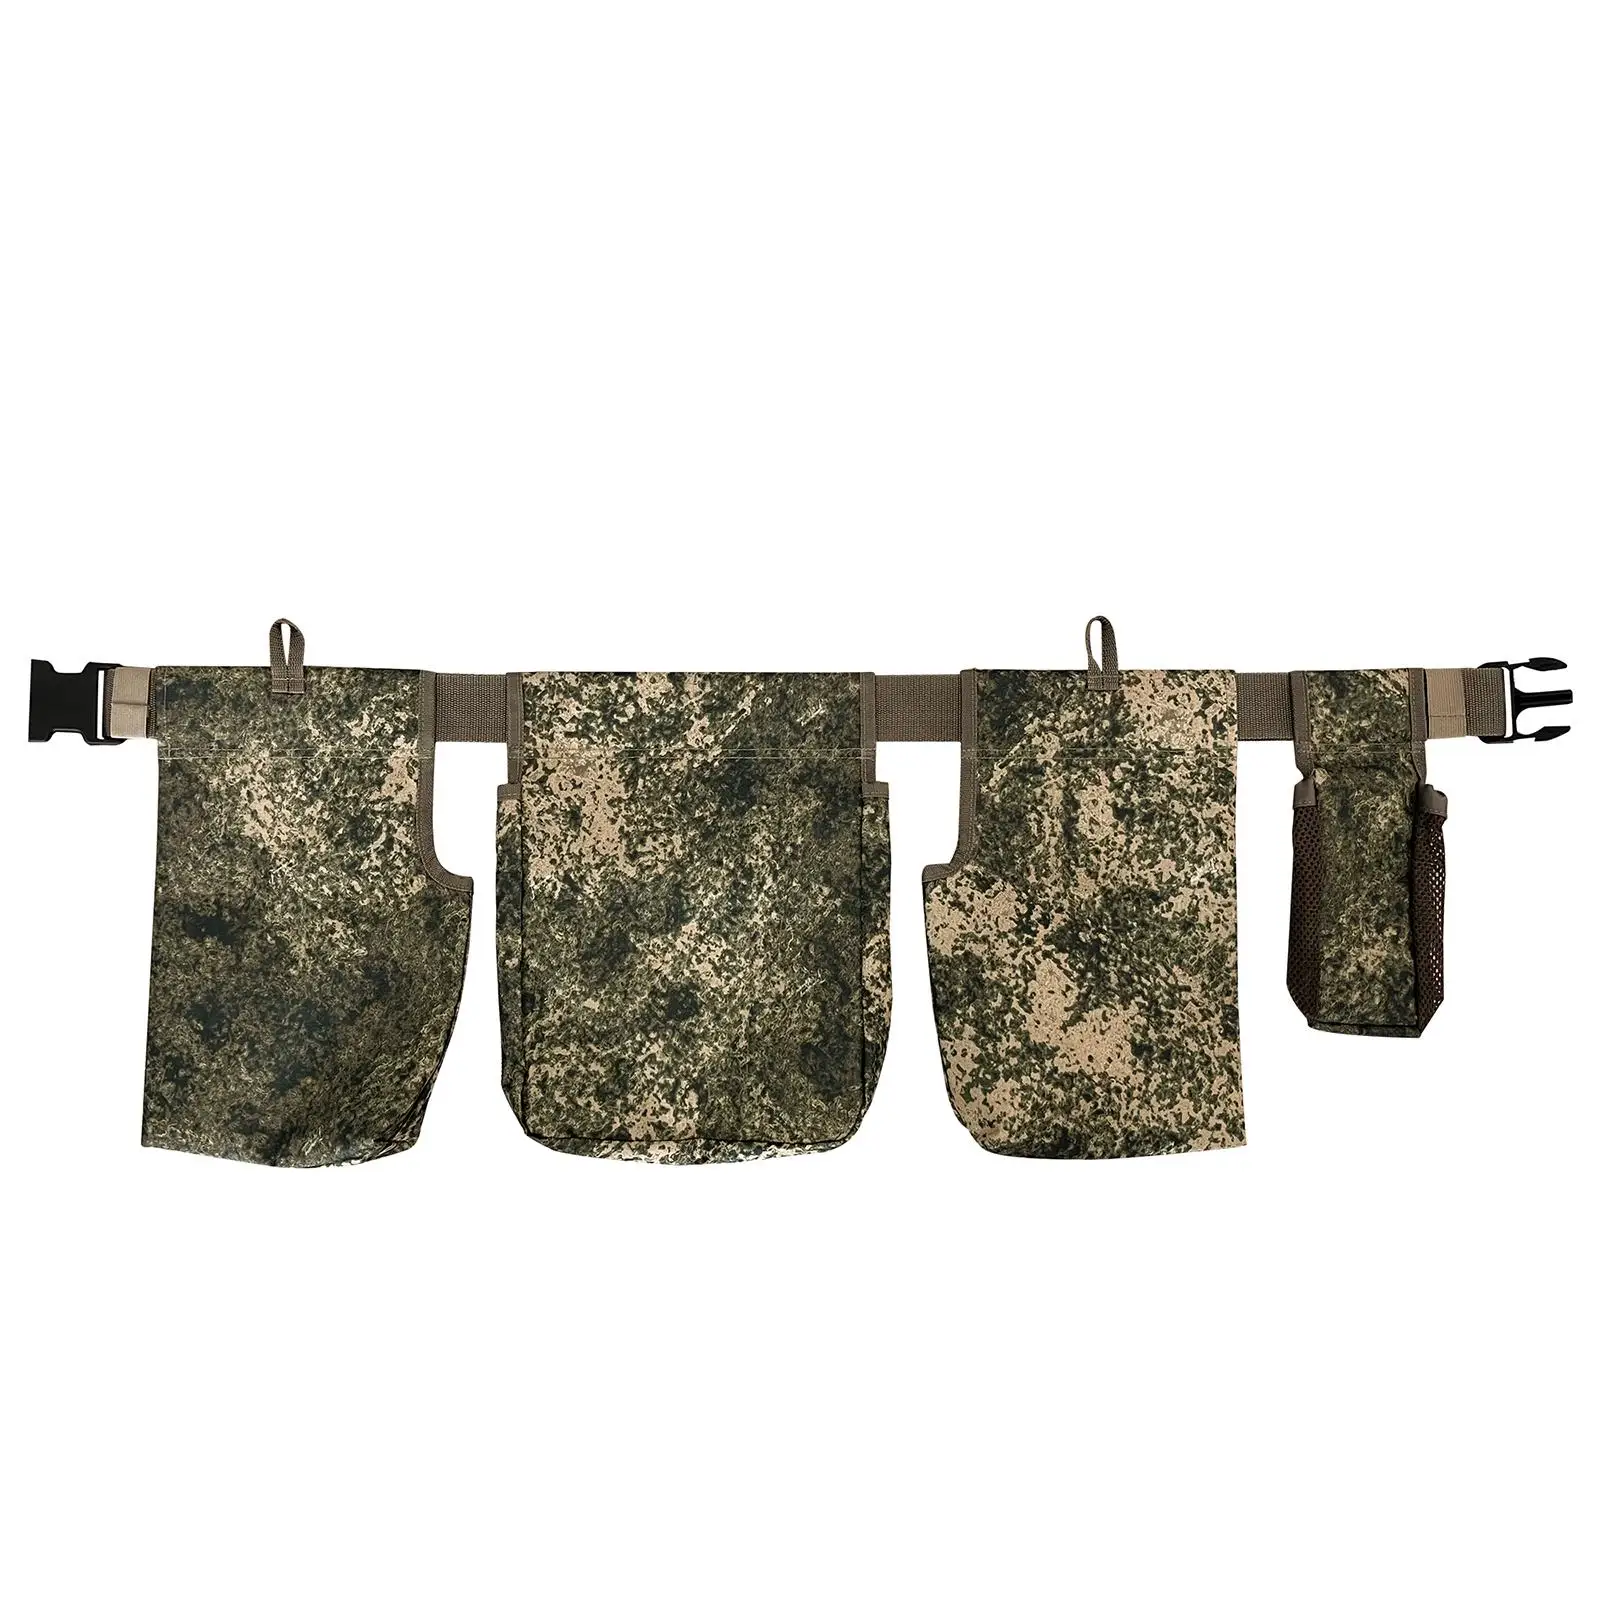 

Waist Bag Multifunctional Portable Scratch Resistant Detachable Tool Molle Pouch for Hiking Fishing Outdoor Sports Camping